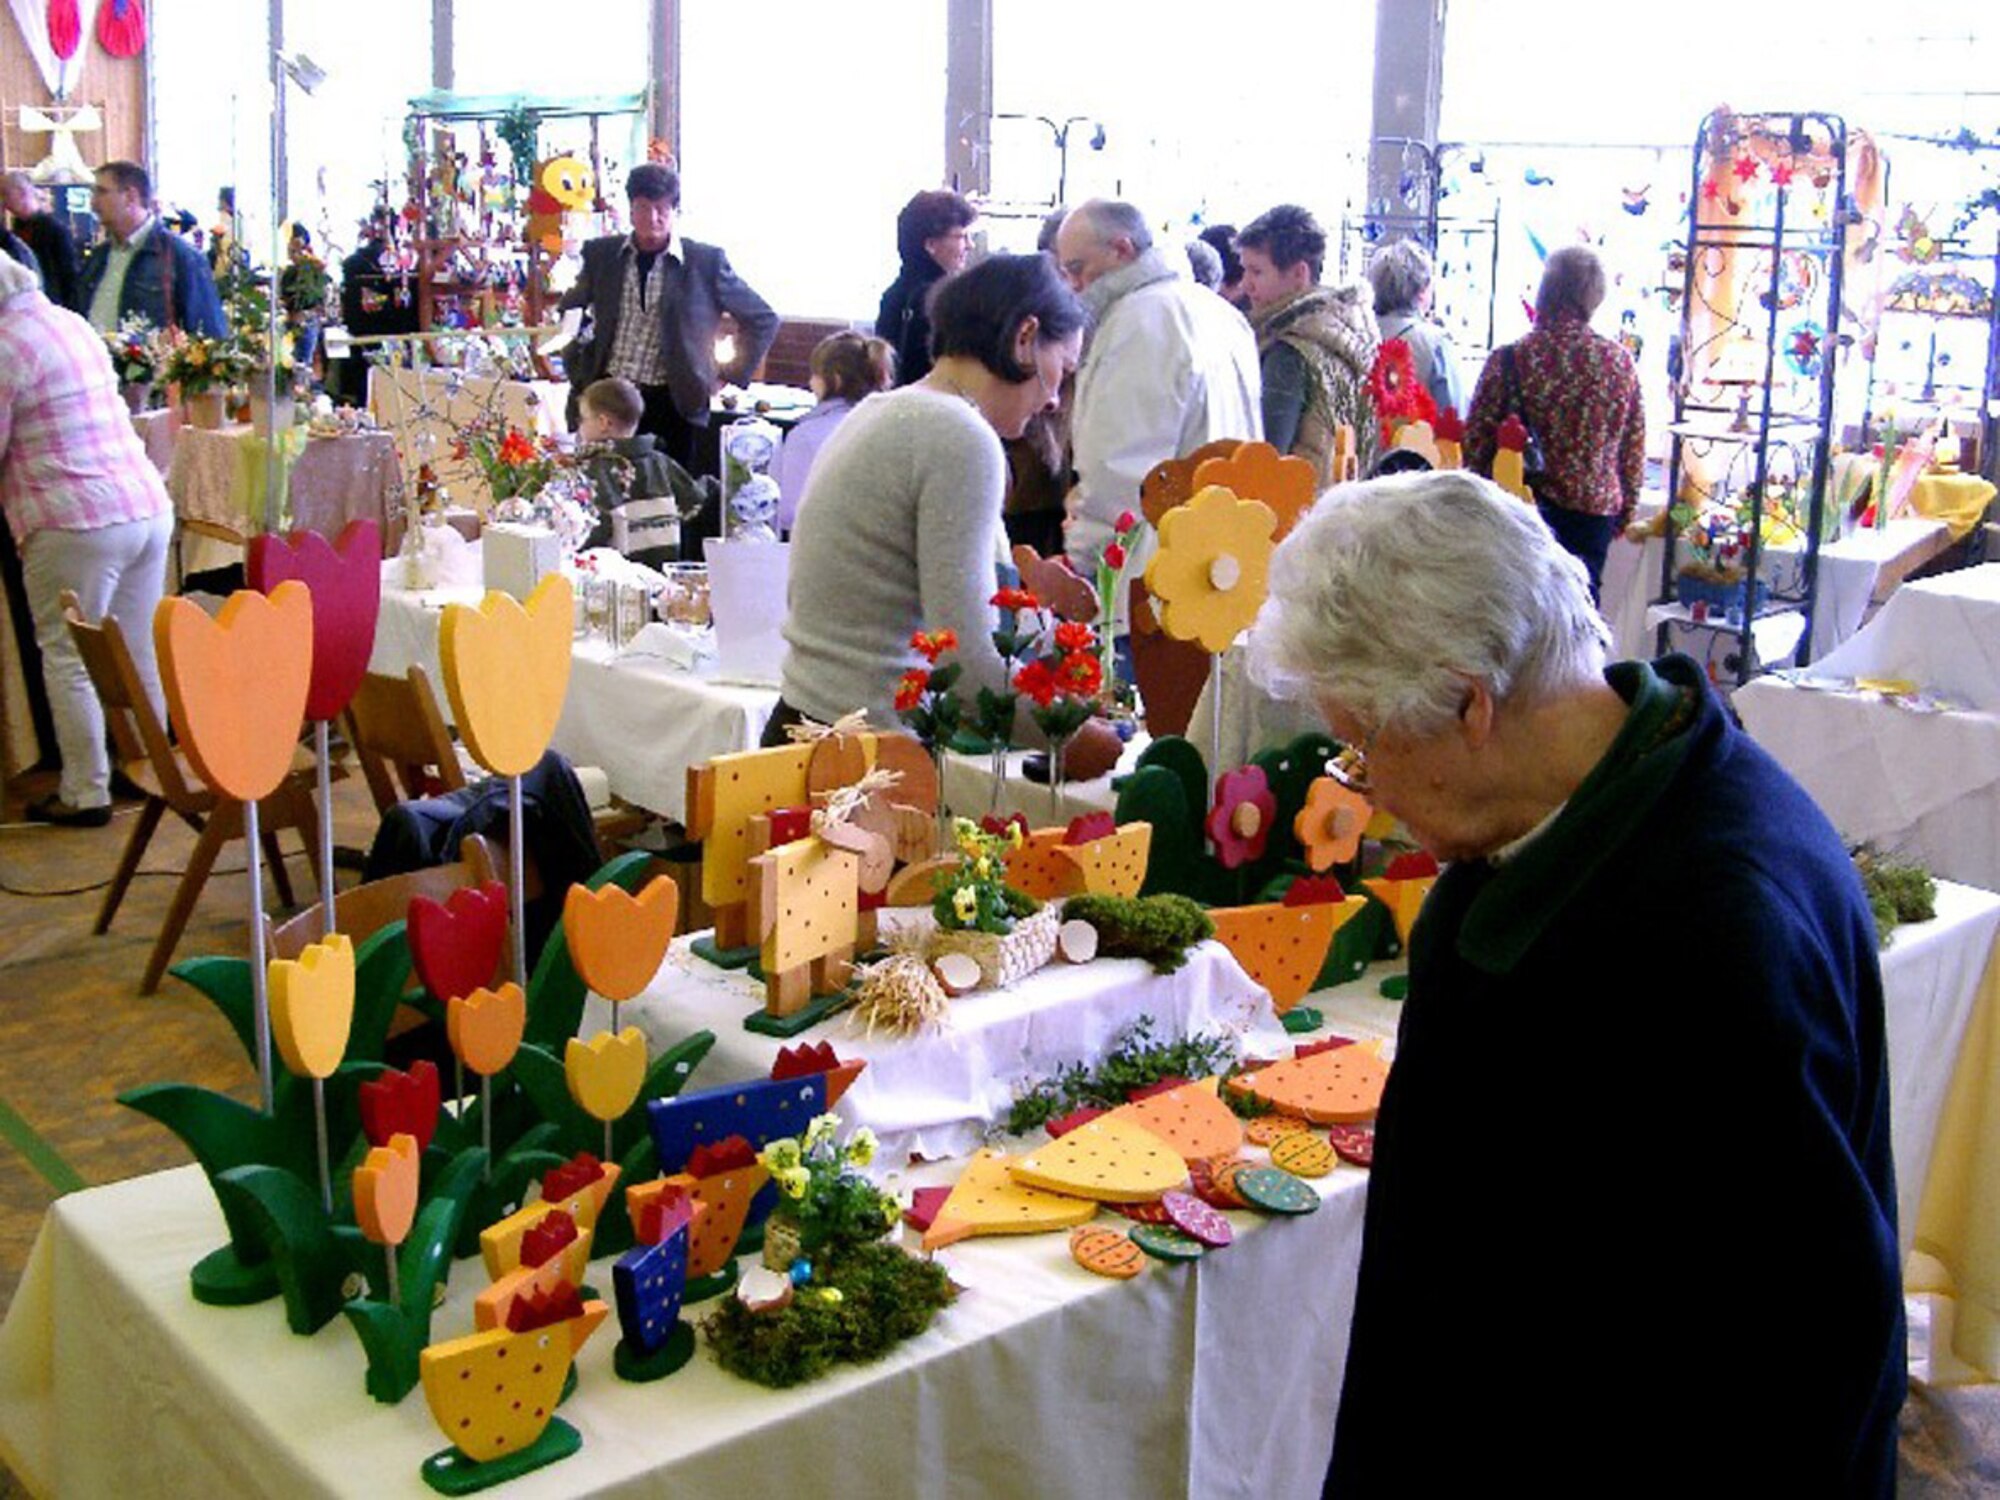 Visitors of the Niederkirchen Easter market find a variety of Easter decorations and handcrafted items. The market takes place Sunday.
